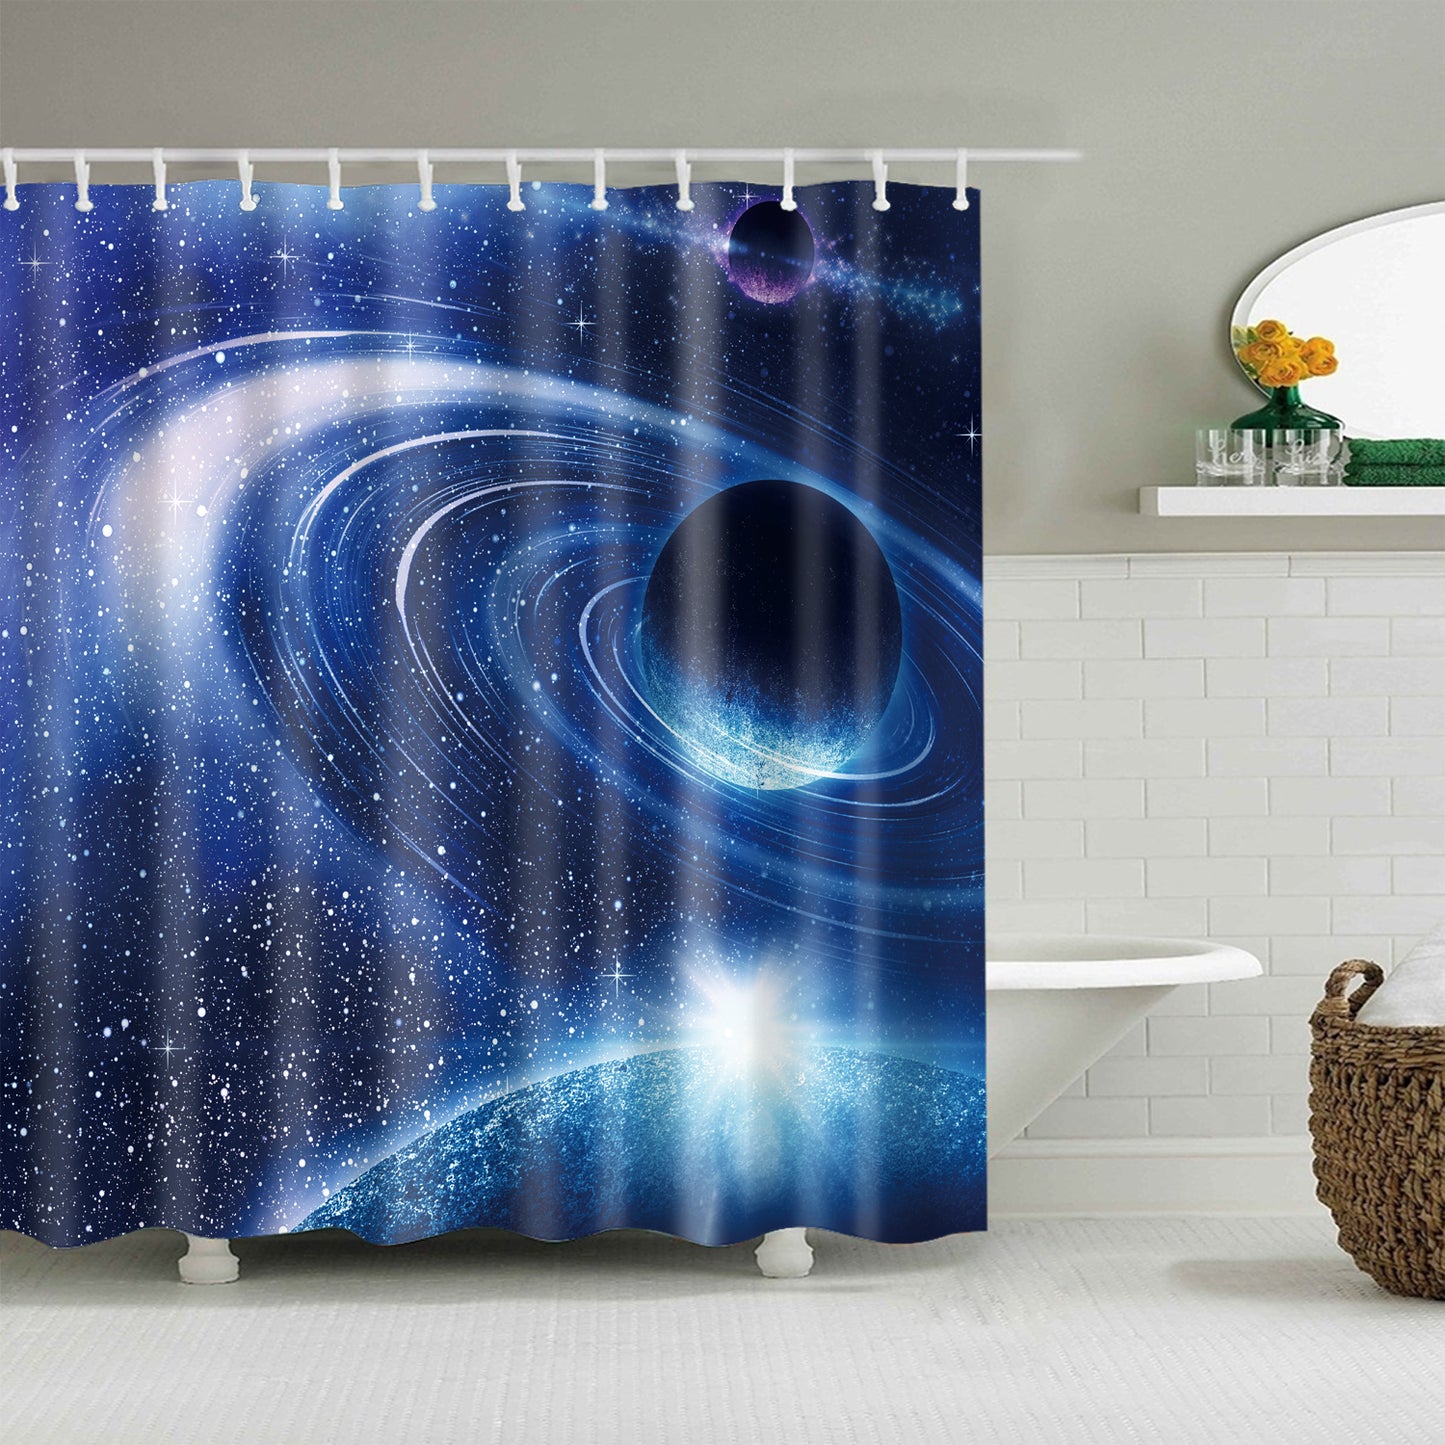 Blue Universe Star Galaxy Planet with Sunrise Shower Curtain